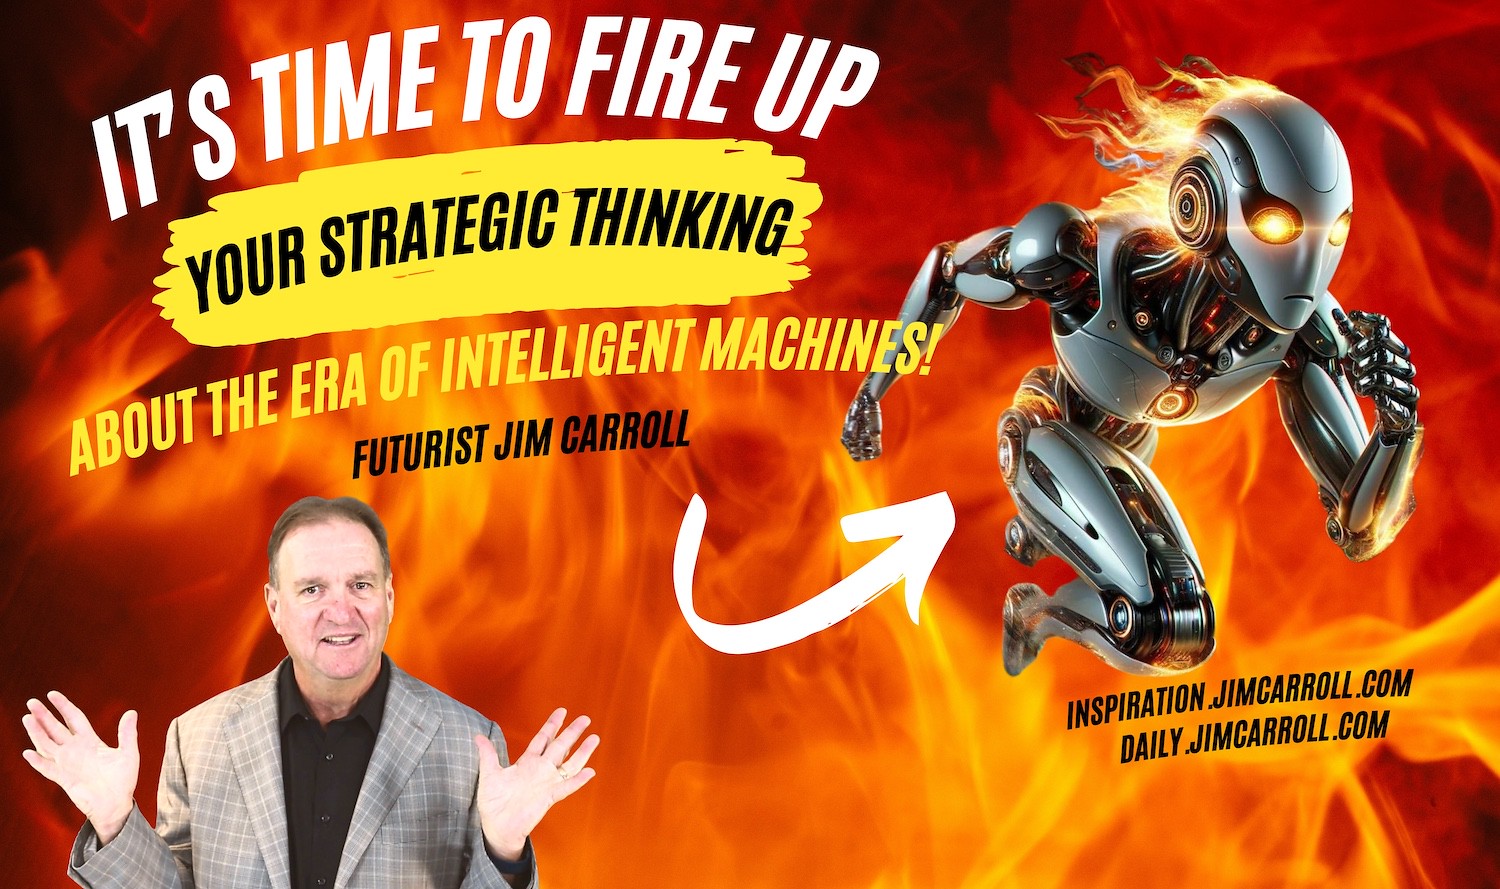 "It's time to fire up your strategic thinking about the era of intelligent machines!" - Futurist Jim Carroll